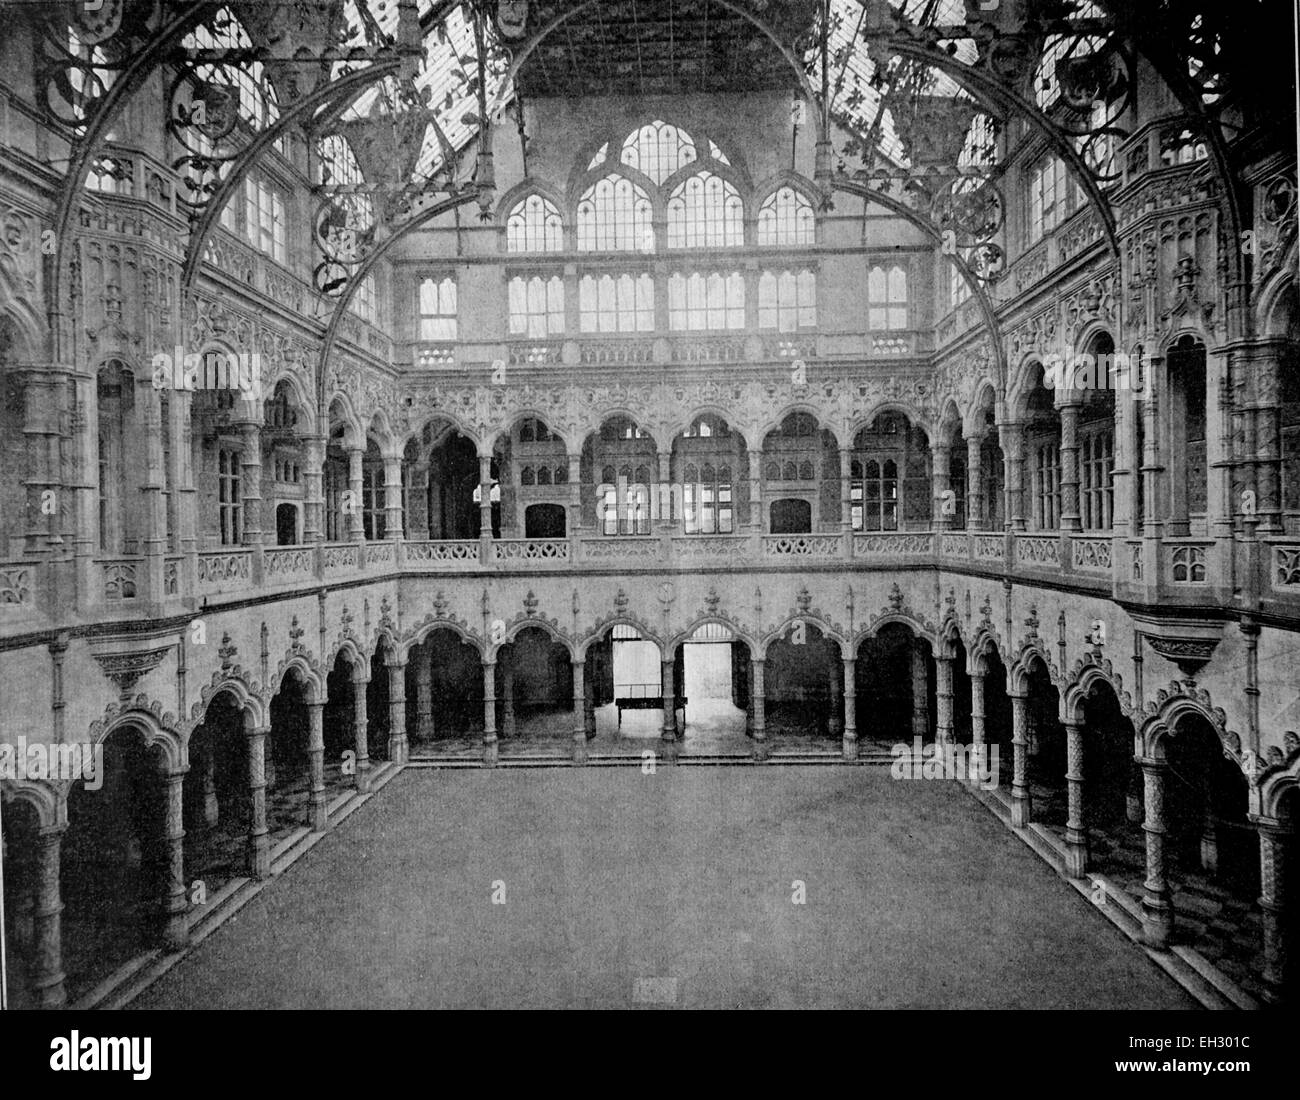 One of the first autotype photographs of the interior of the stock exchange, Bourse d'Anvers, Antwerp, Belgium, circa 1880 Stock Photo